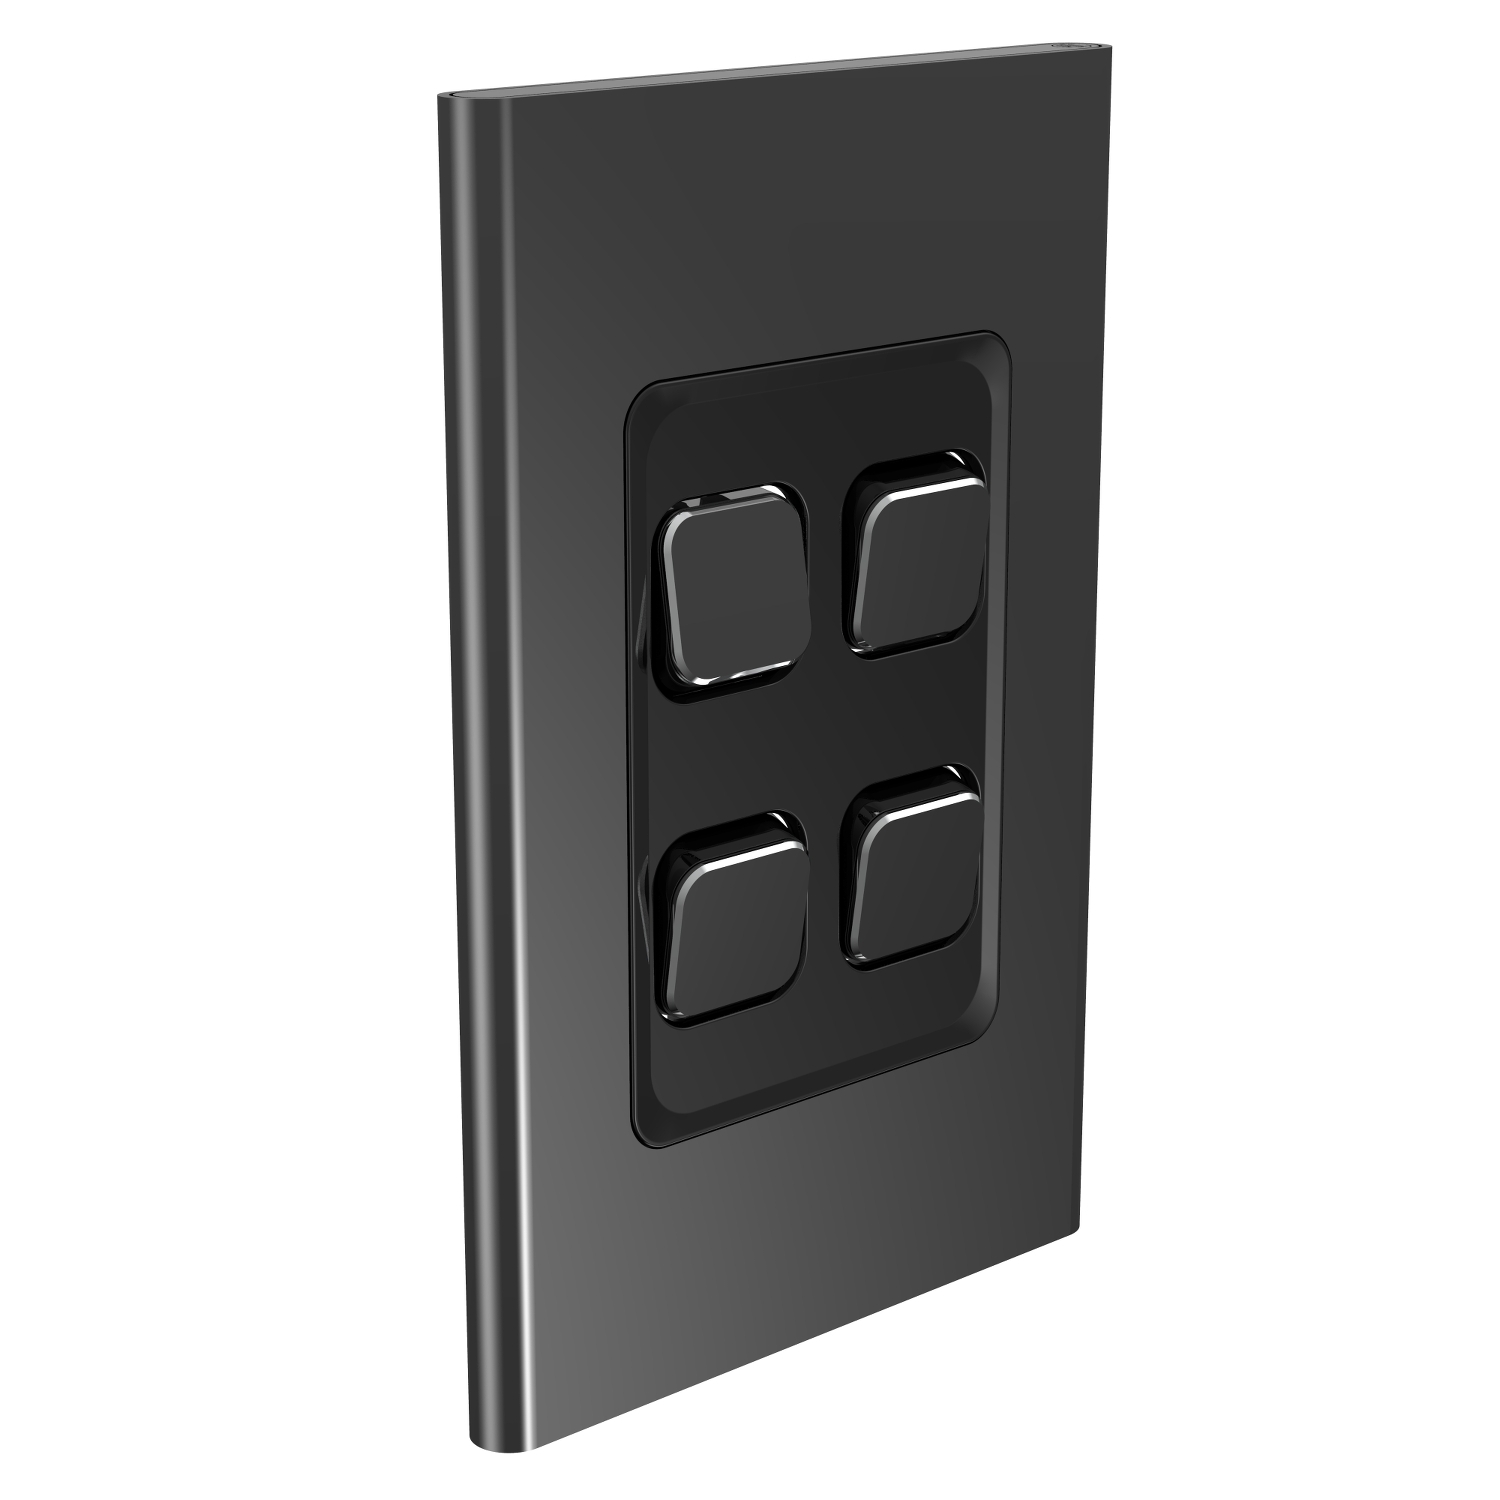 PDL Iconic Styl, cover frame, 4 switches, vertical - Silver Shadow